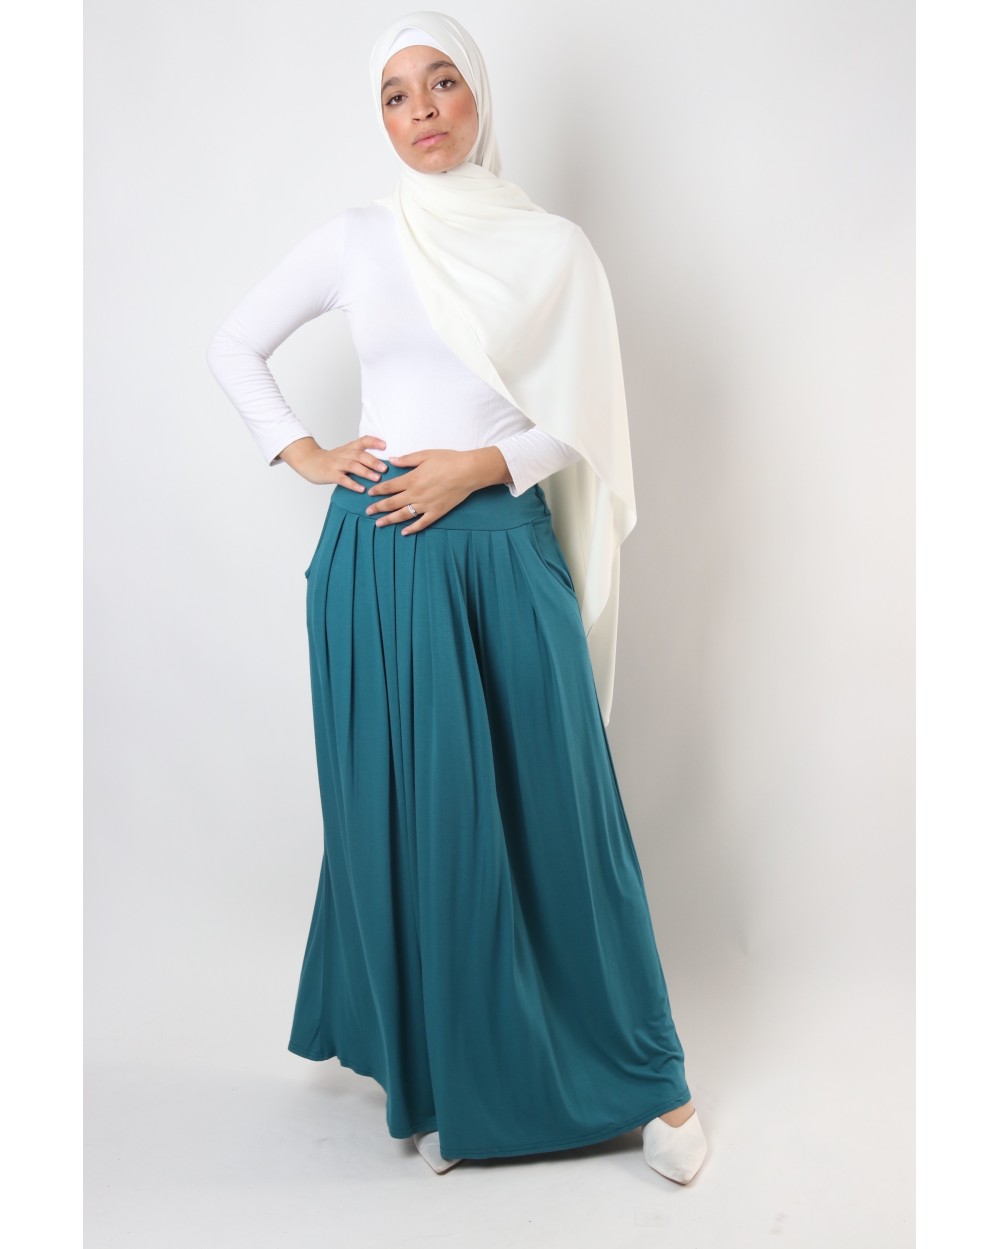 Long skirt with pockets